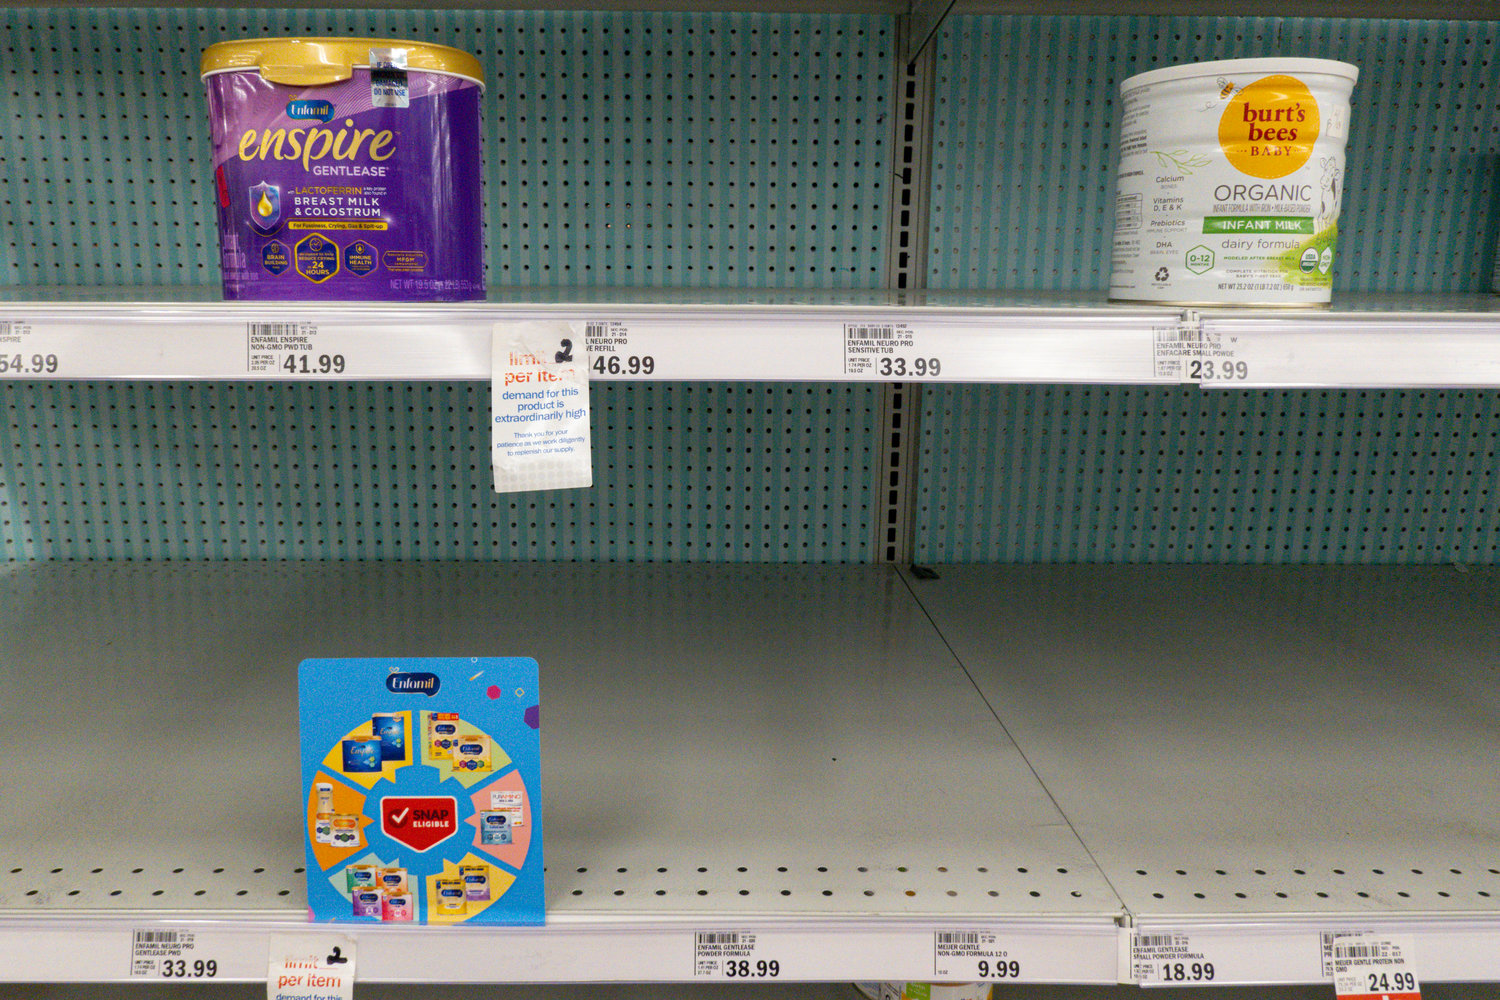 Baby formula is displayed on the shelves of a grocery store in Carmel, Ind. on May 10, 2022. Among actions taken during the formula shortage over the past several months, a bill introduced early June, 2022, would require the Food and Drug Administration to inspect infant formula facilities every six months. U.S. regulators have historically inspected baby formula plants at least once a year, but they did not inspect any of the three biggest manufacturers in 2020.